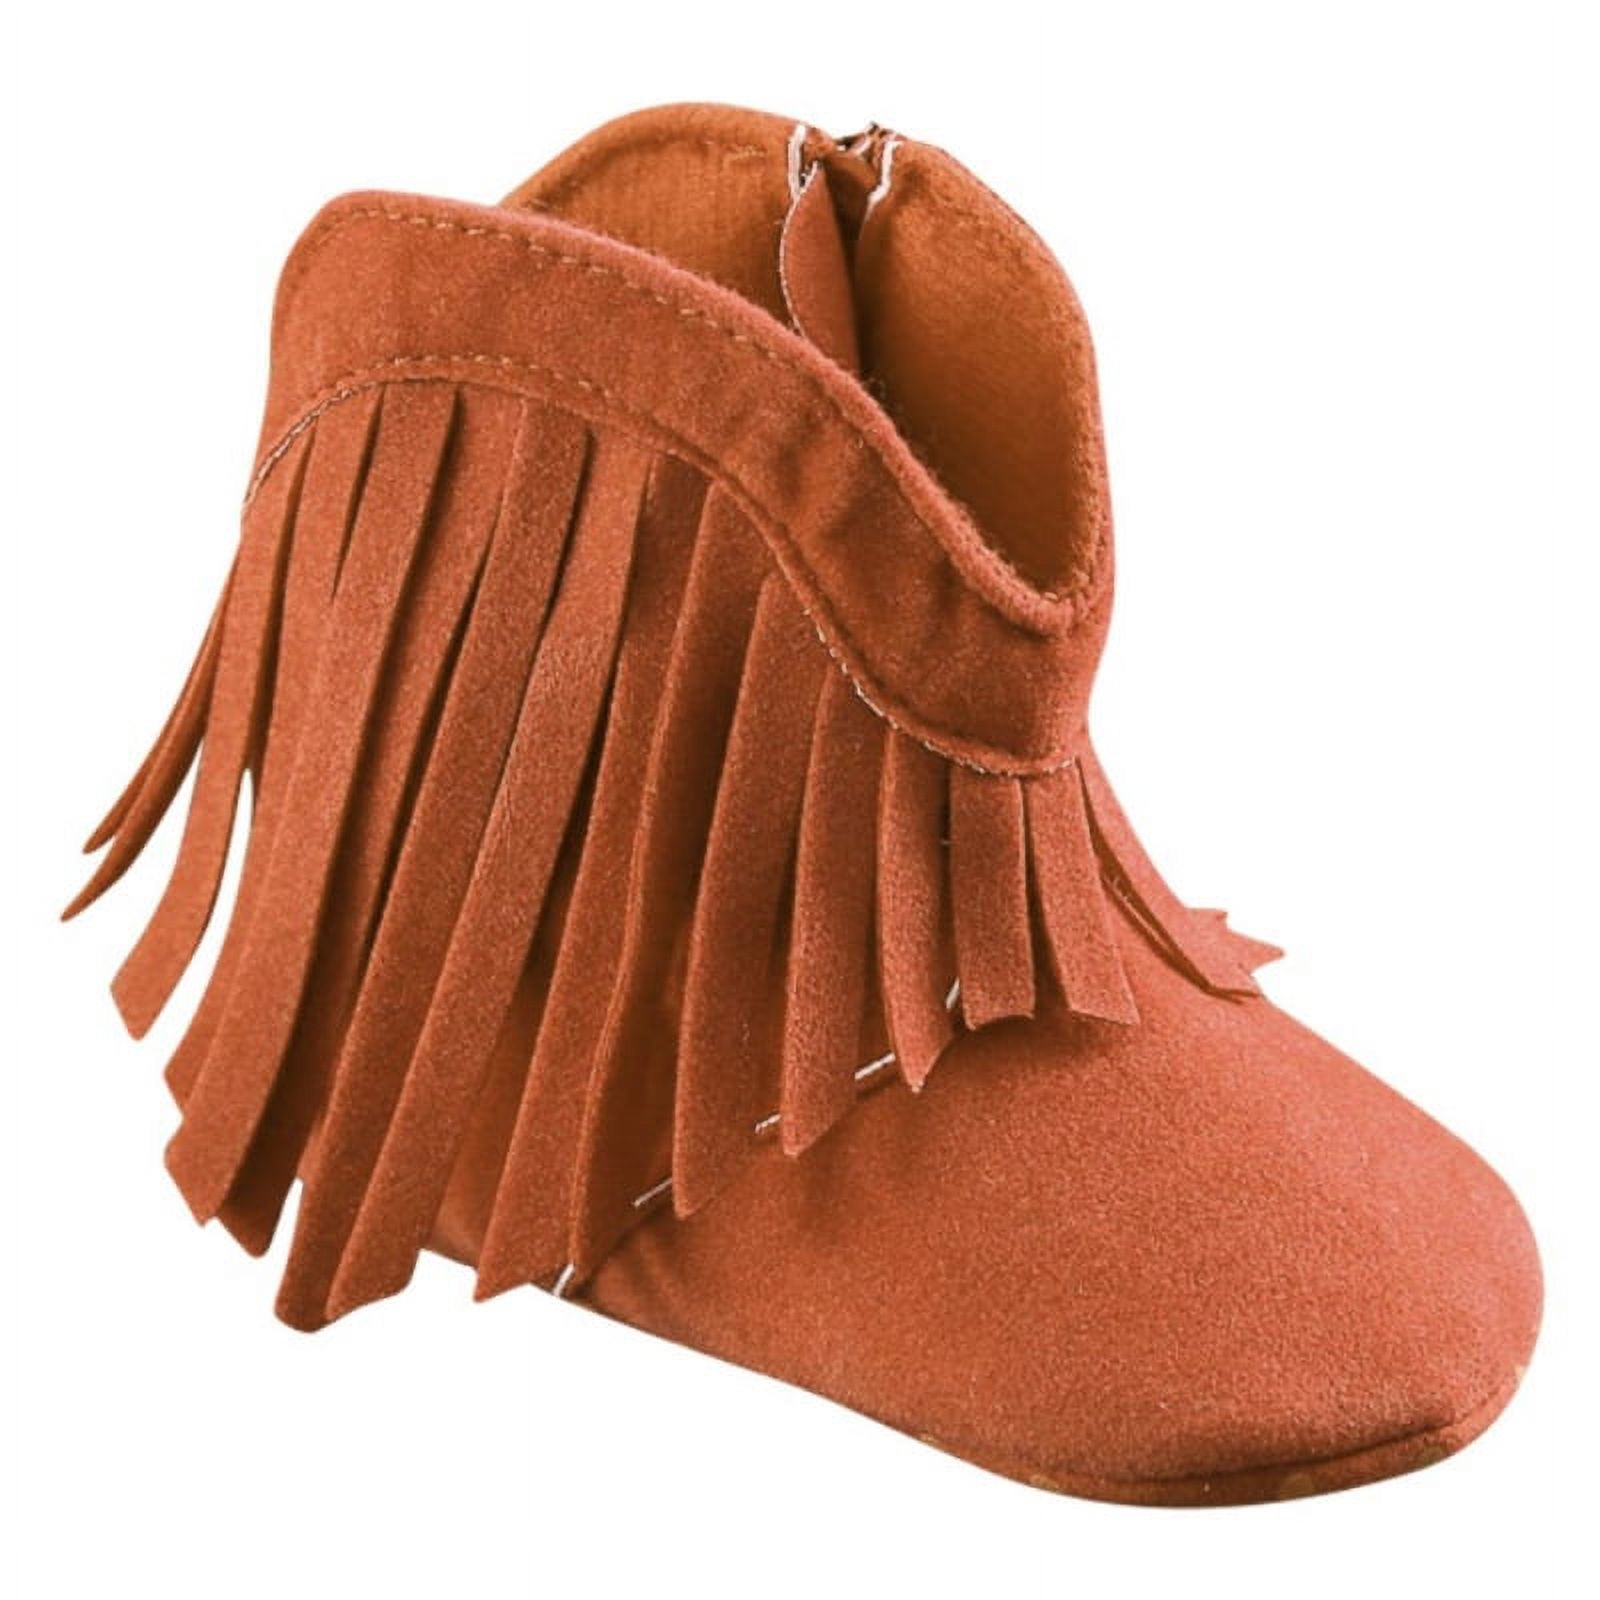 Fymall Infant Toddler Tassel Boots Baby Boy Girl Soft Soled Winter Shoes - image 5 of 5